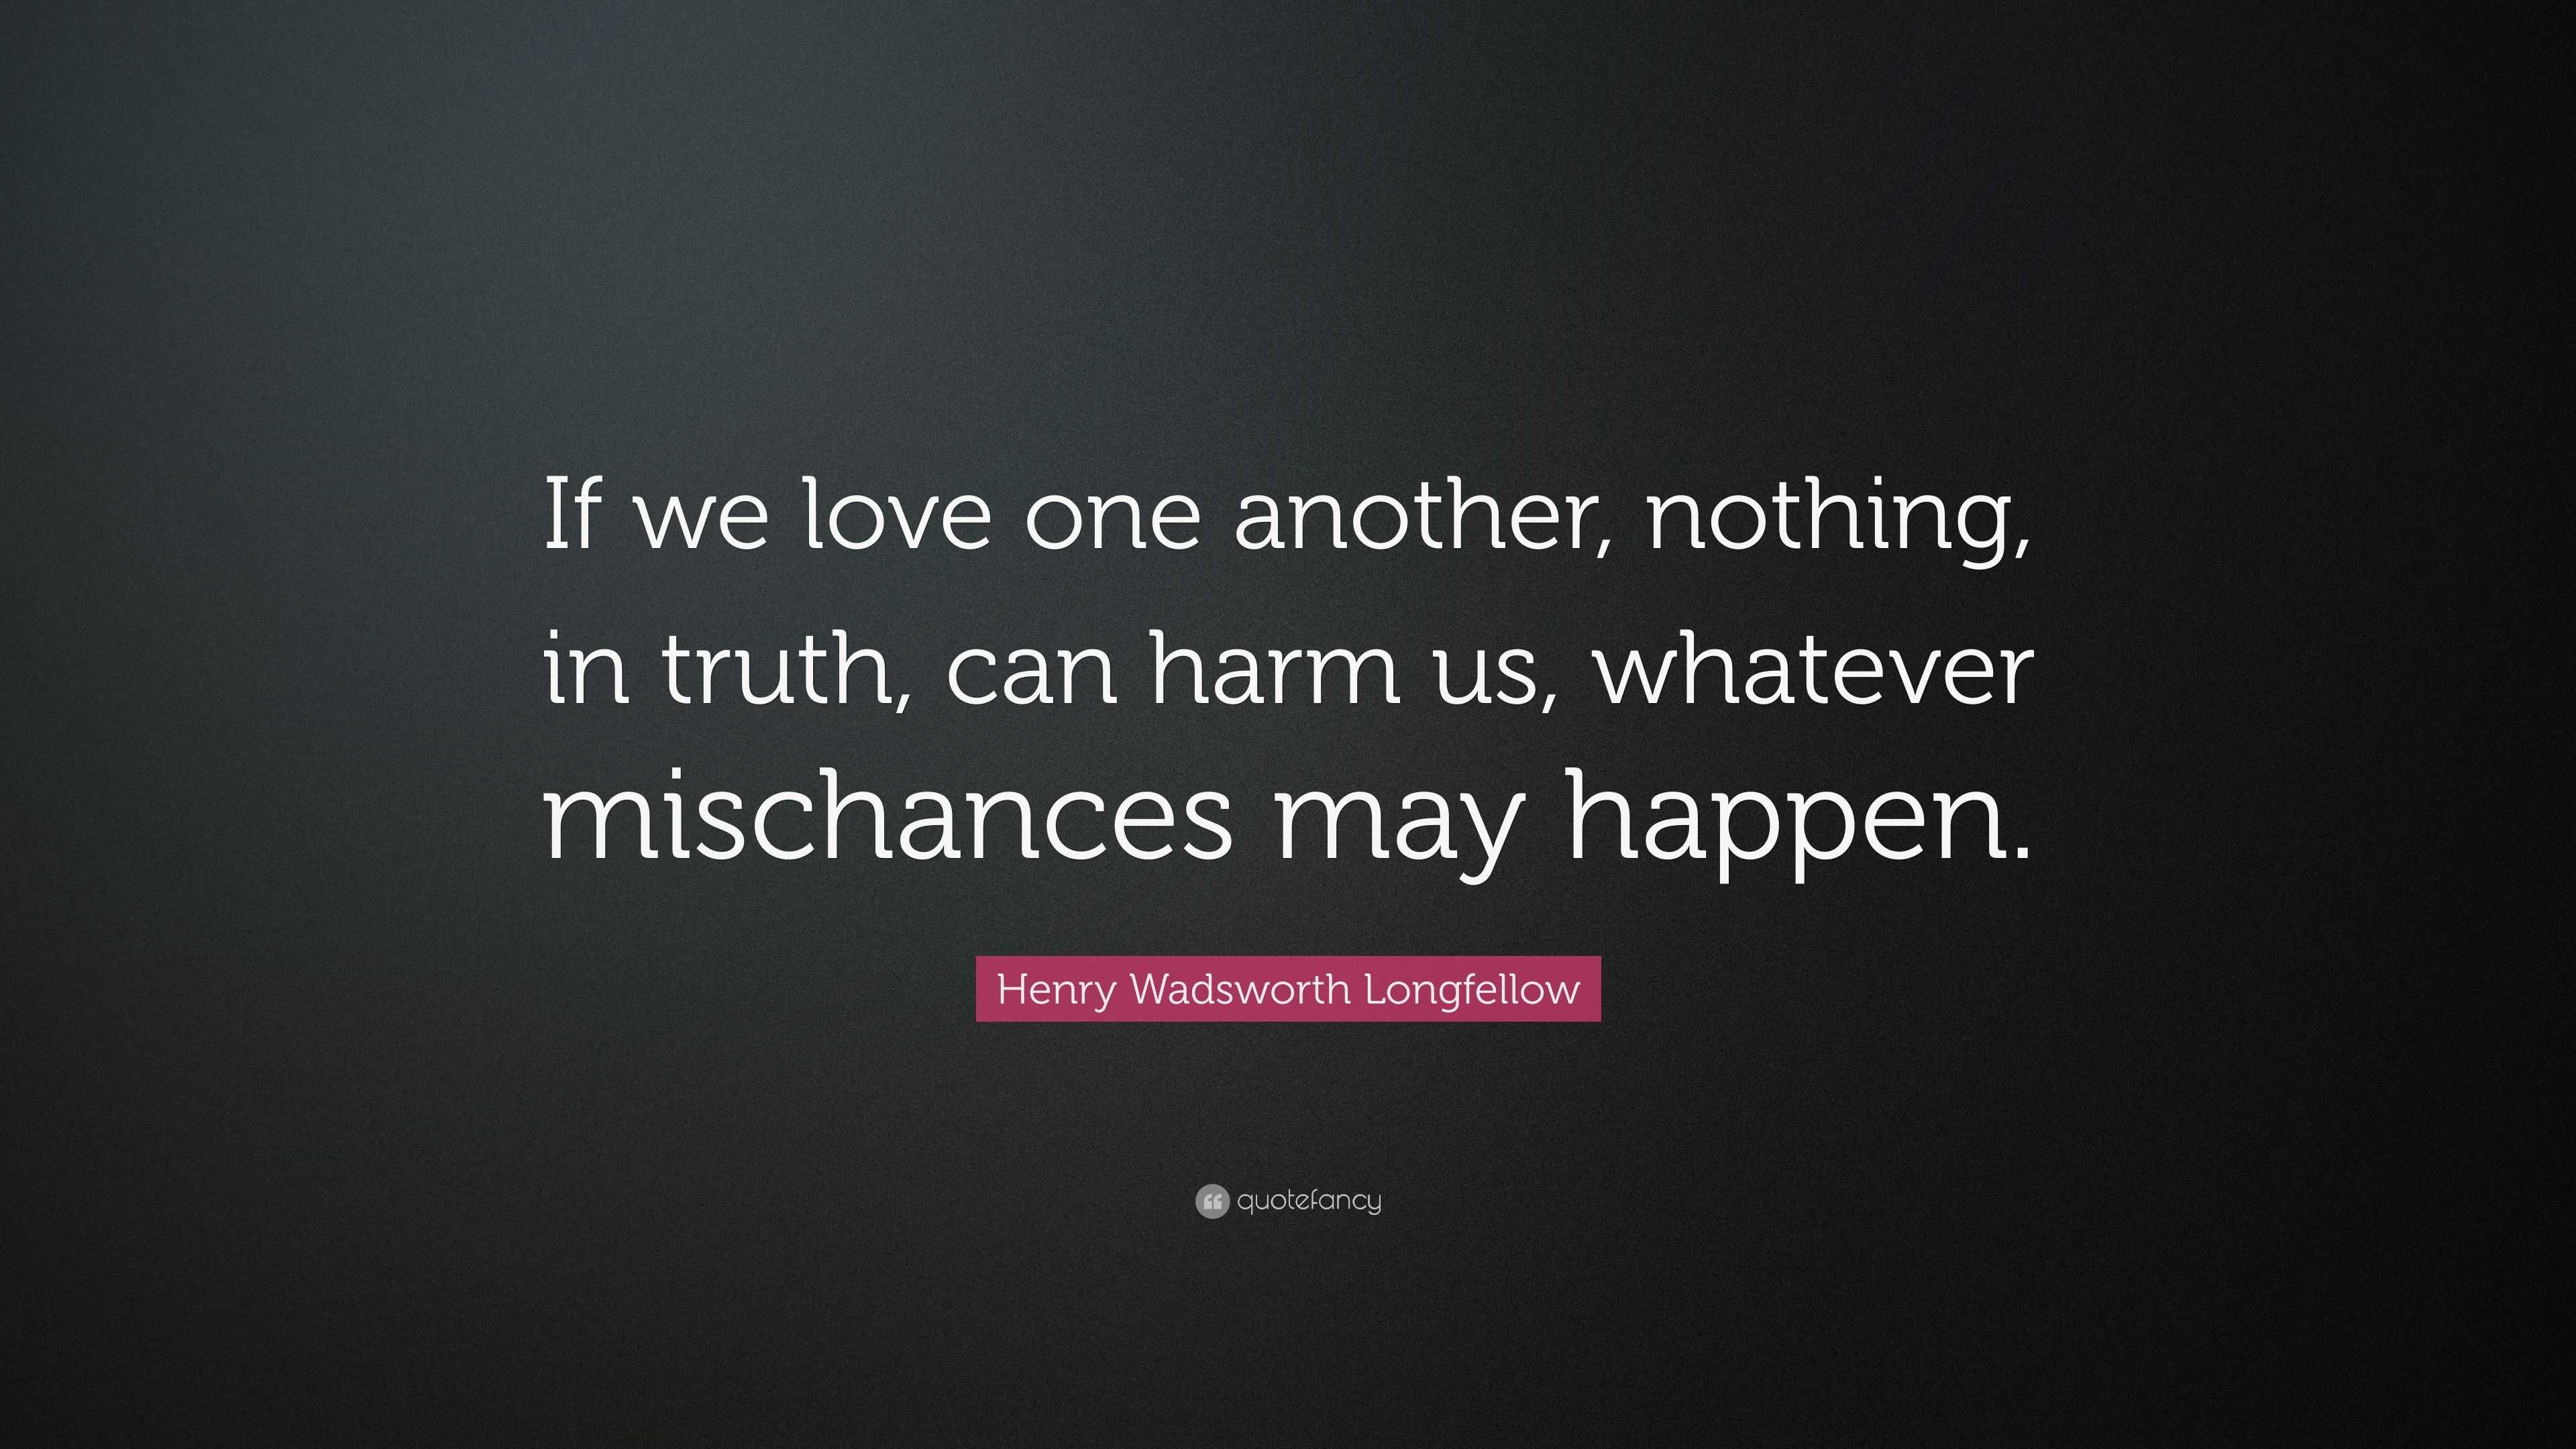 Henry Wadsworth Longfellow Quote: “If we love one another, nothing, in truth,  can harm us, whatever